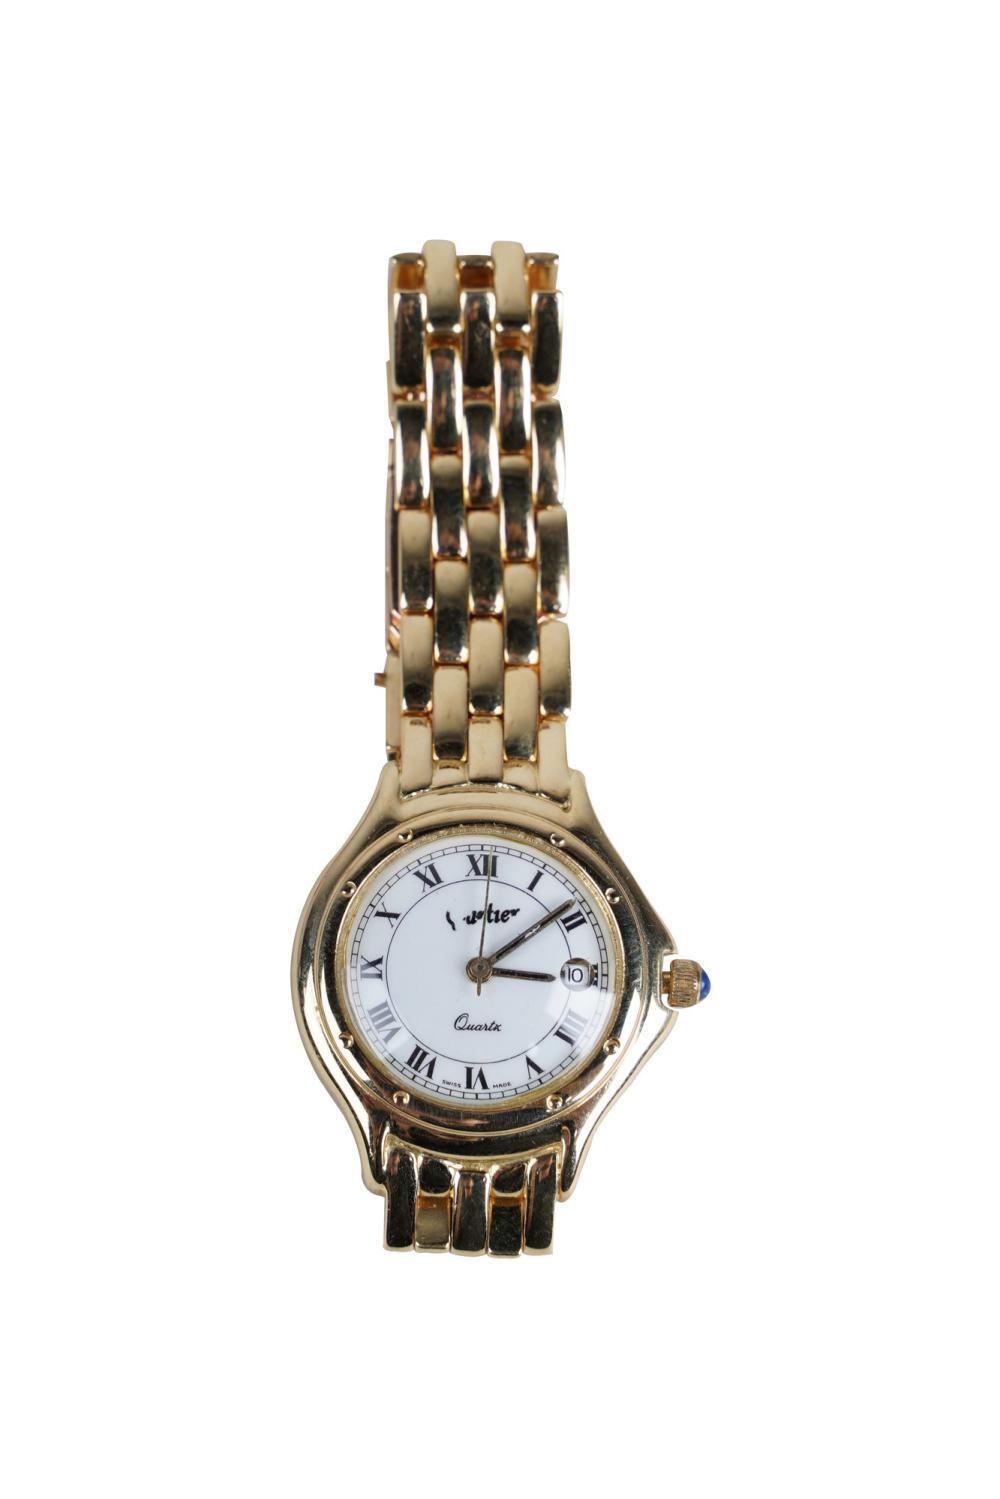 18 KARAT GOLD LADY S WATCHwith 336049